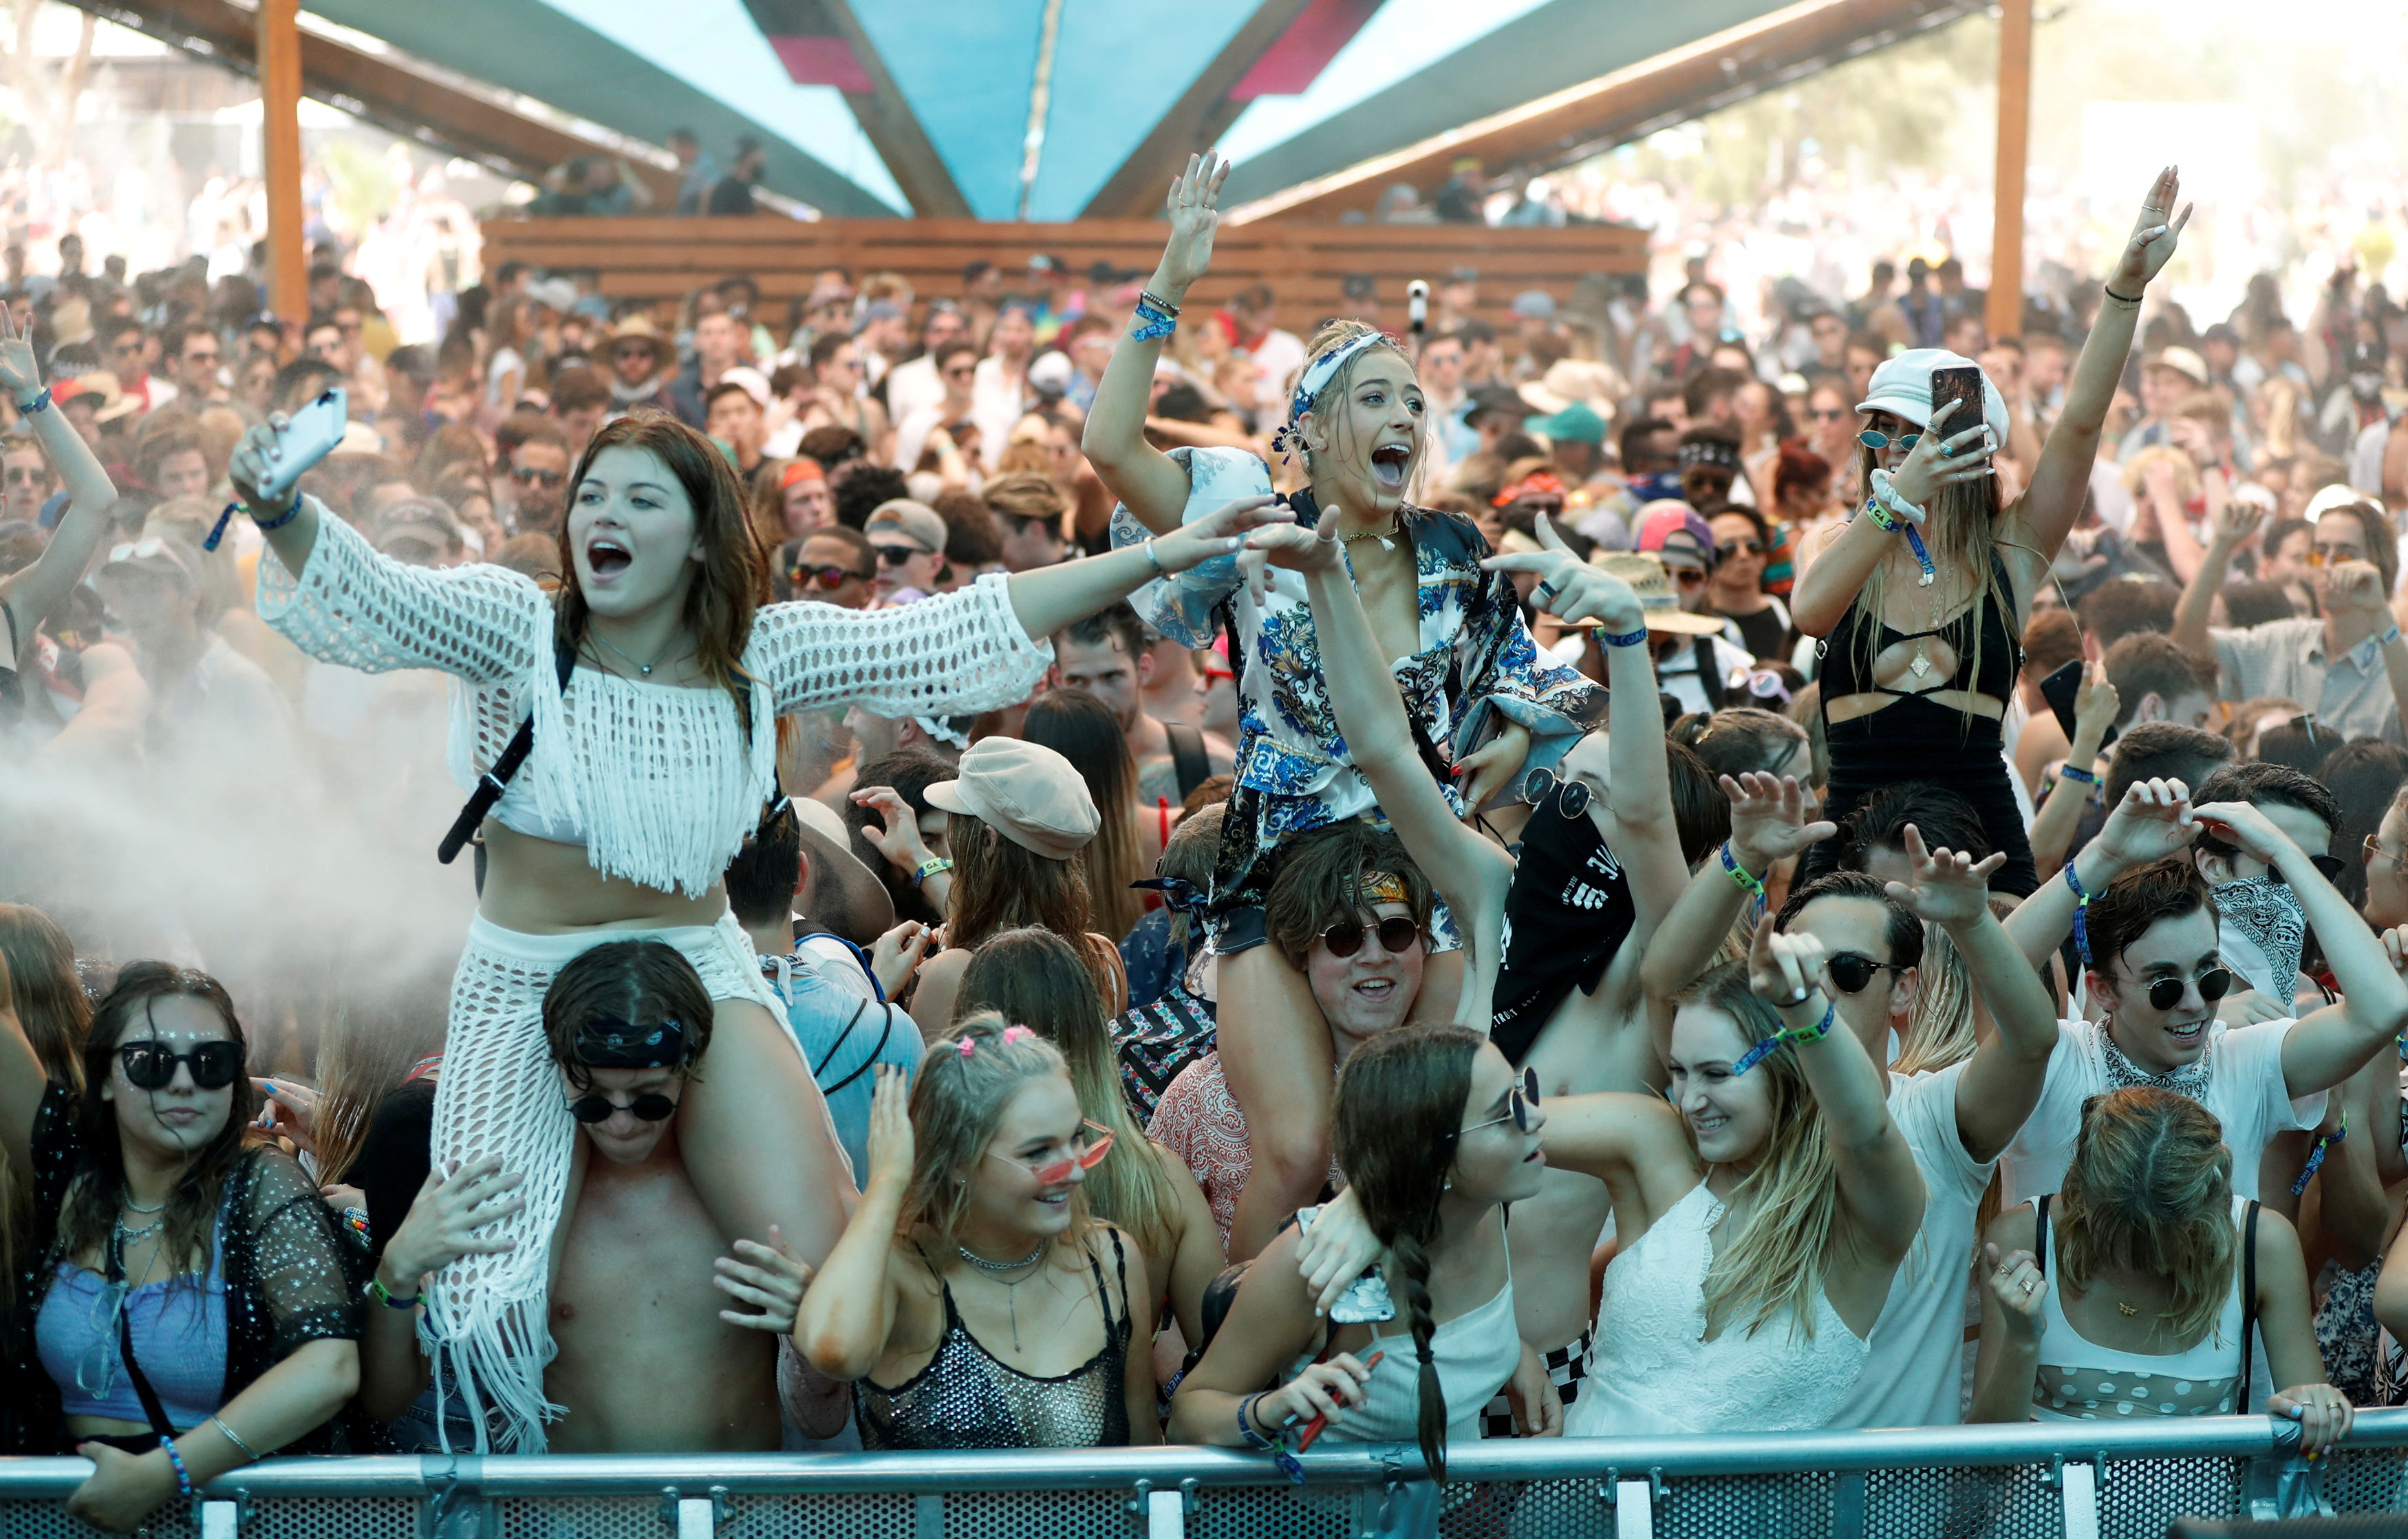 Concertgoers dance at the Do LaB stage at the Coachella Valley Music and Arts Festival in Indio